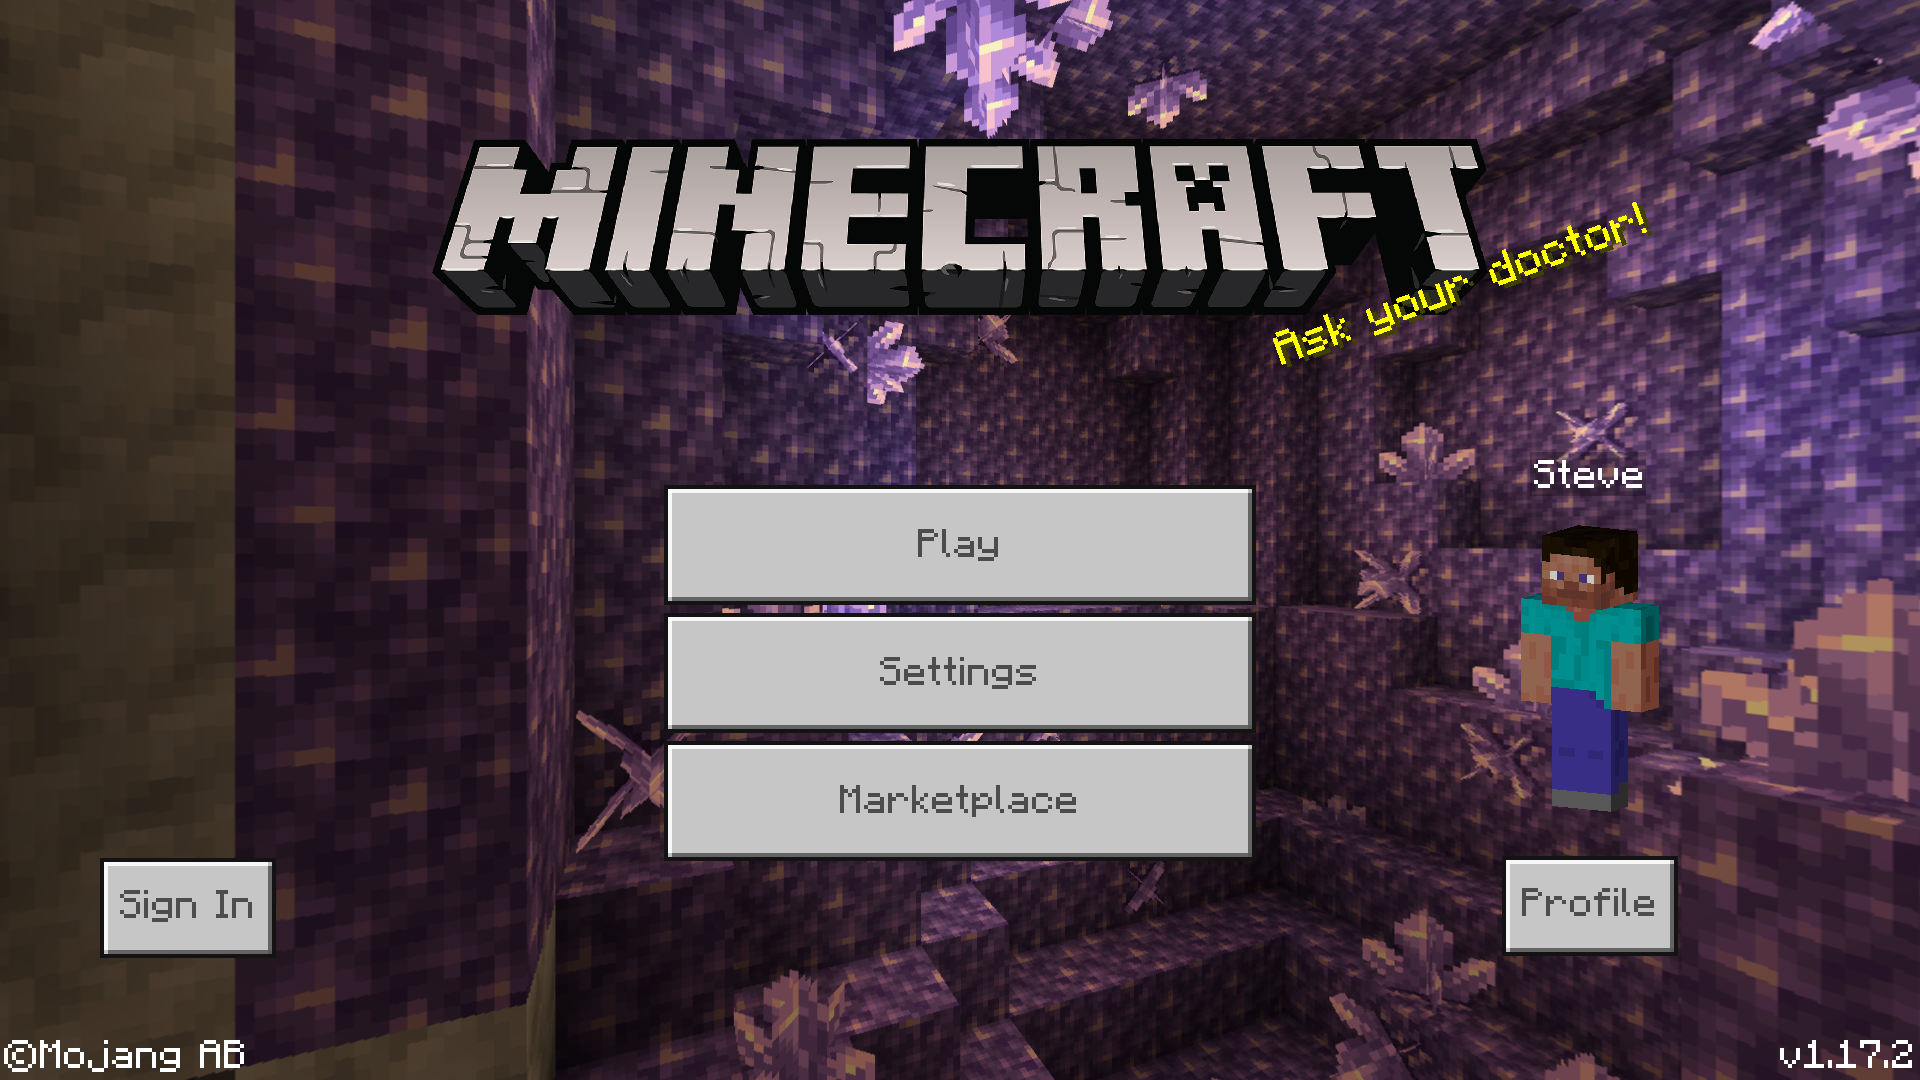 Download Minecraft 1.18.32 Caves and Cliffs 2 apk free: Full Version